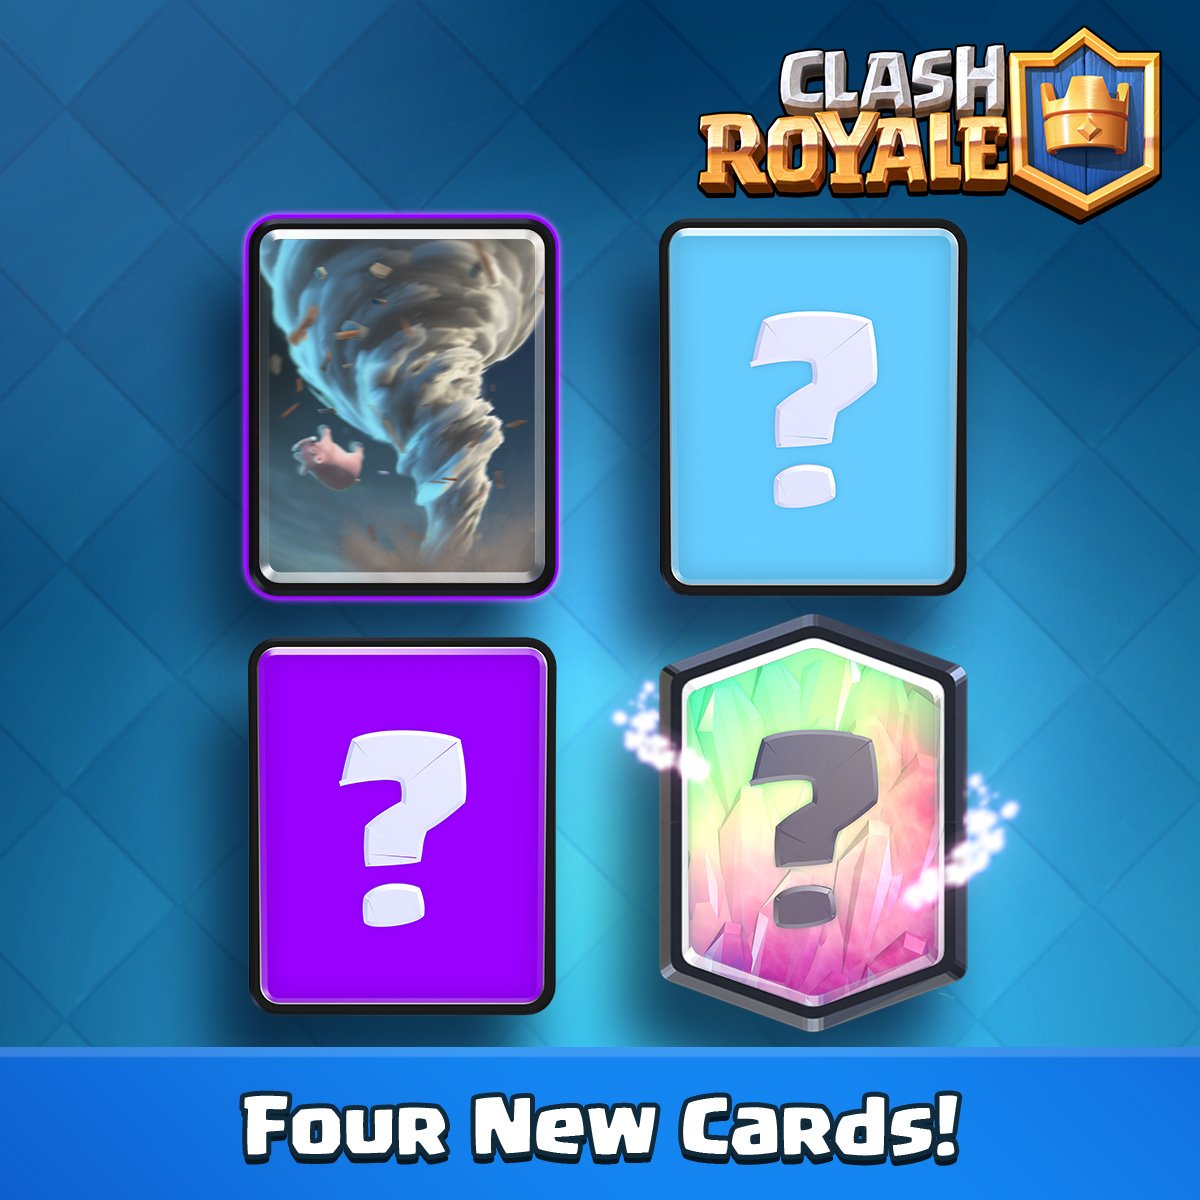 Clash Royale Sneak Peek 2 Four New Cards Tornado Available On Nov 11 One New Card Will Be Released Every Two Weeks